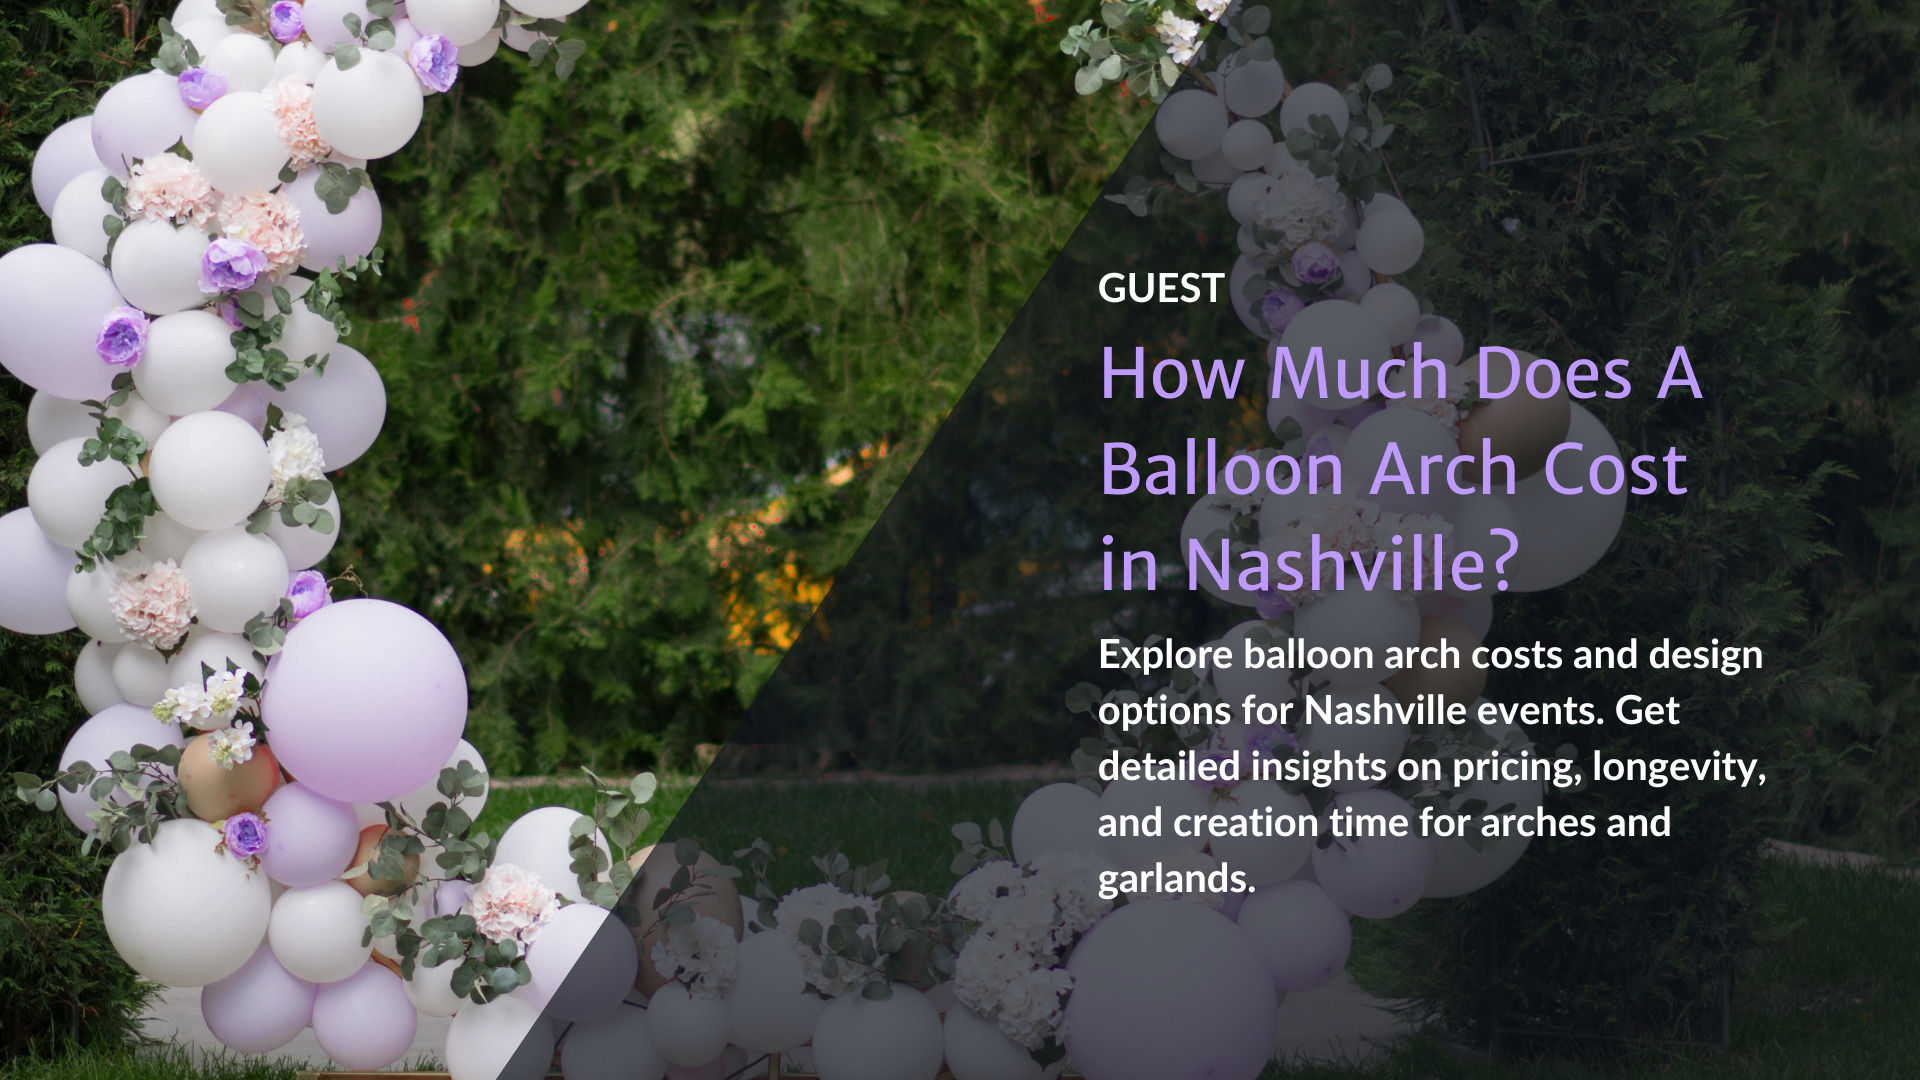 How Much Does A Balloon Arch Cost in Nashville?